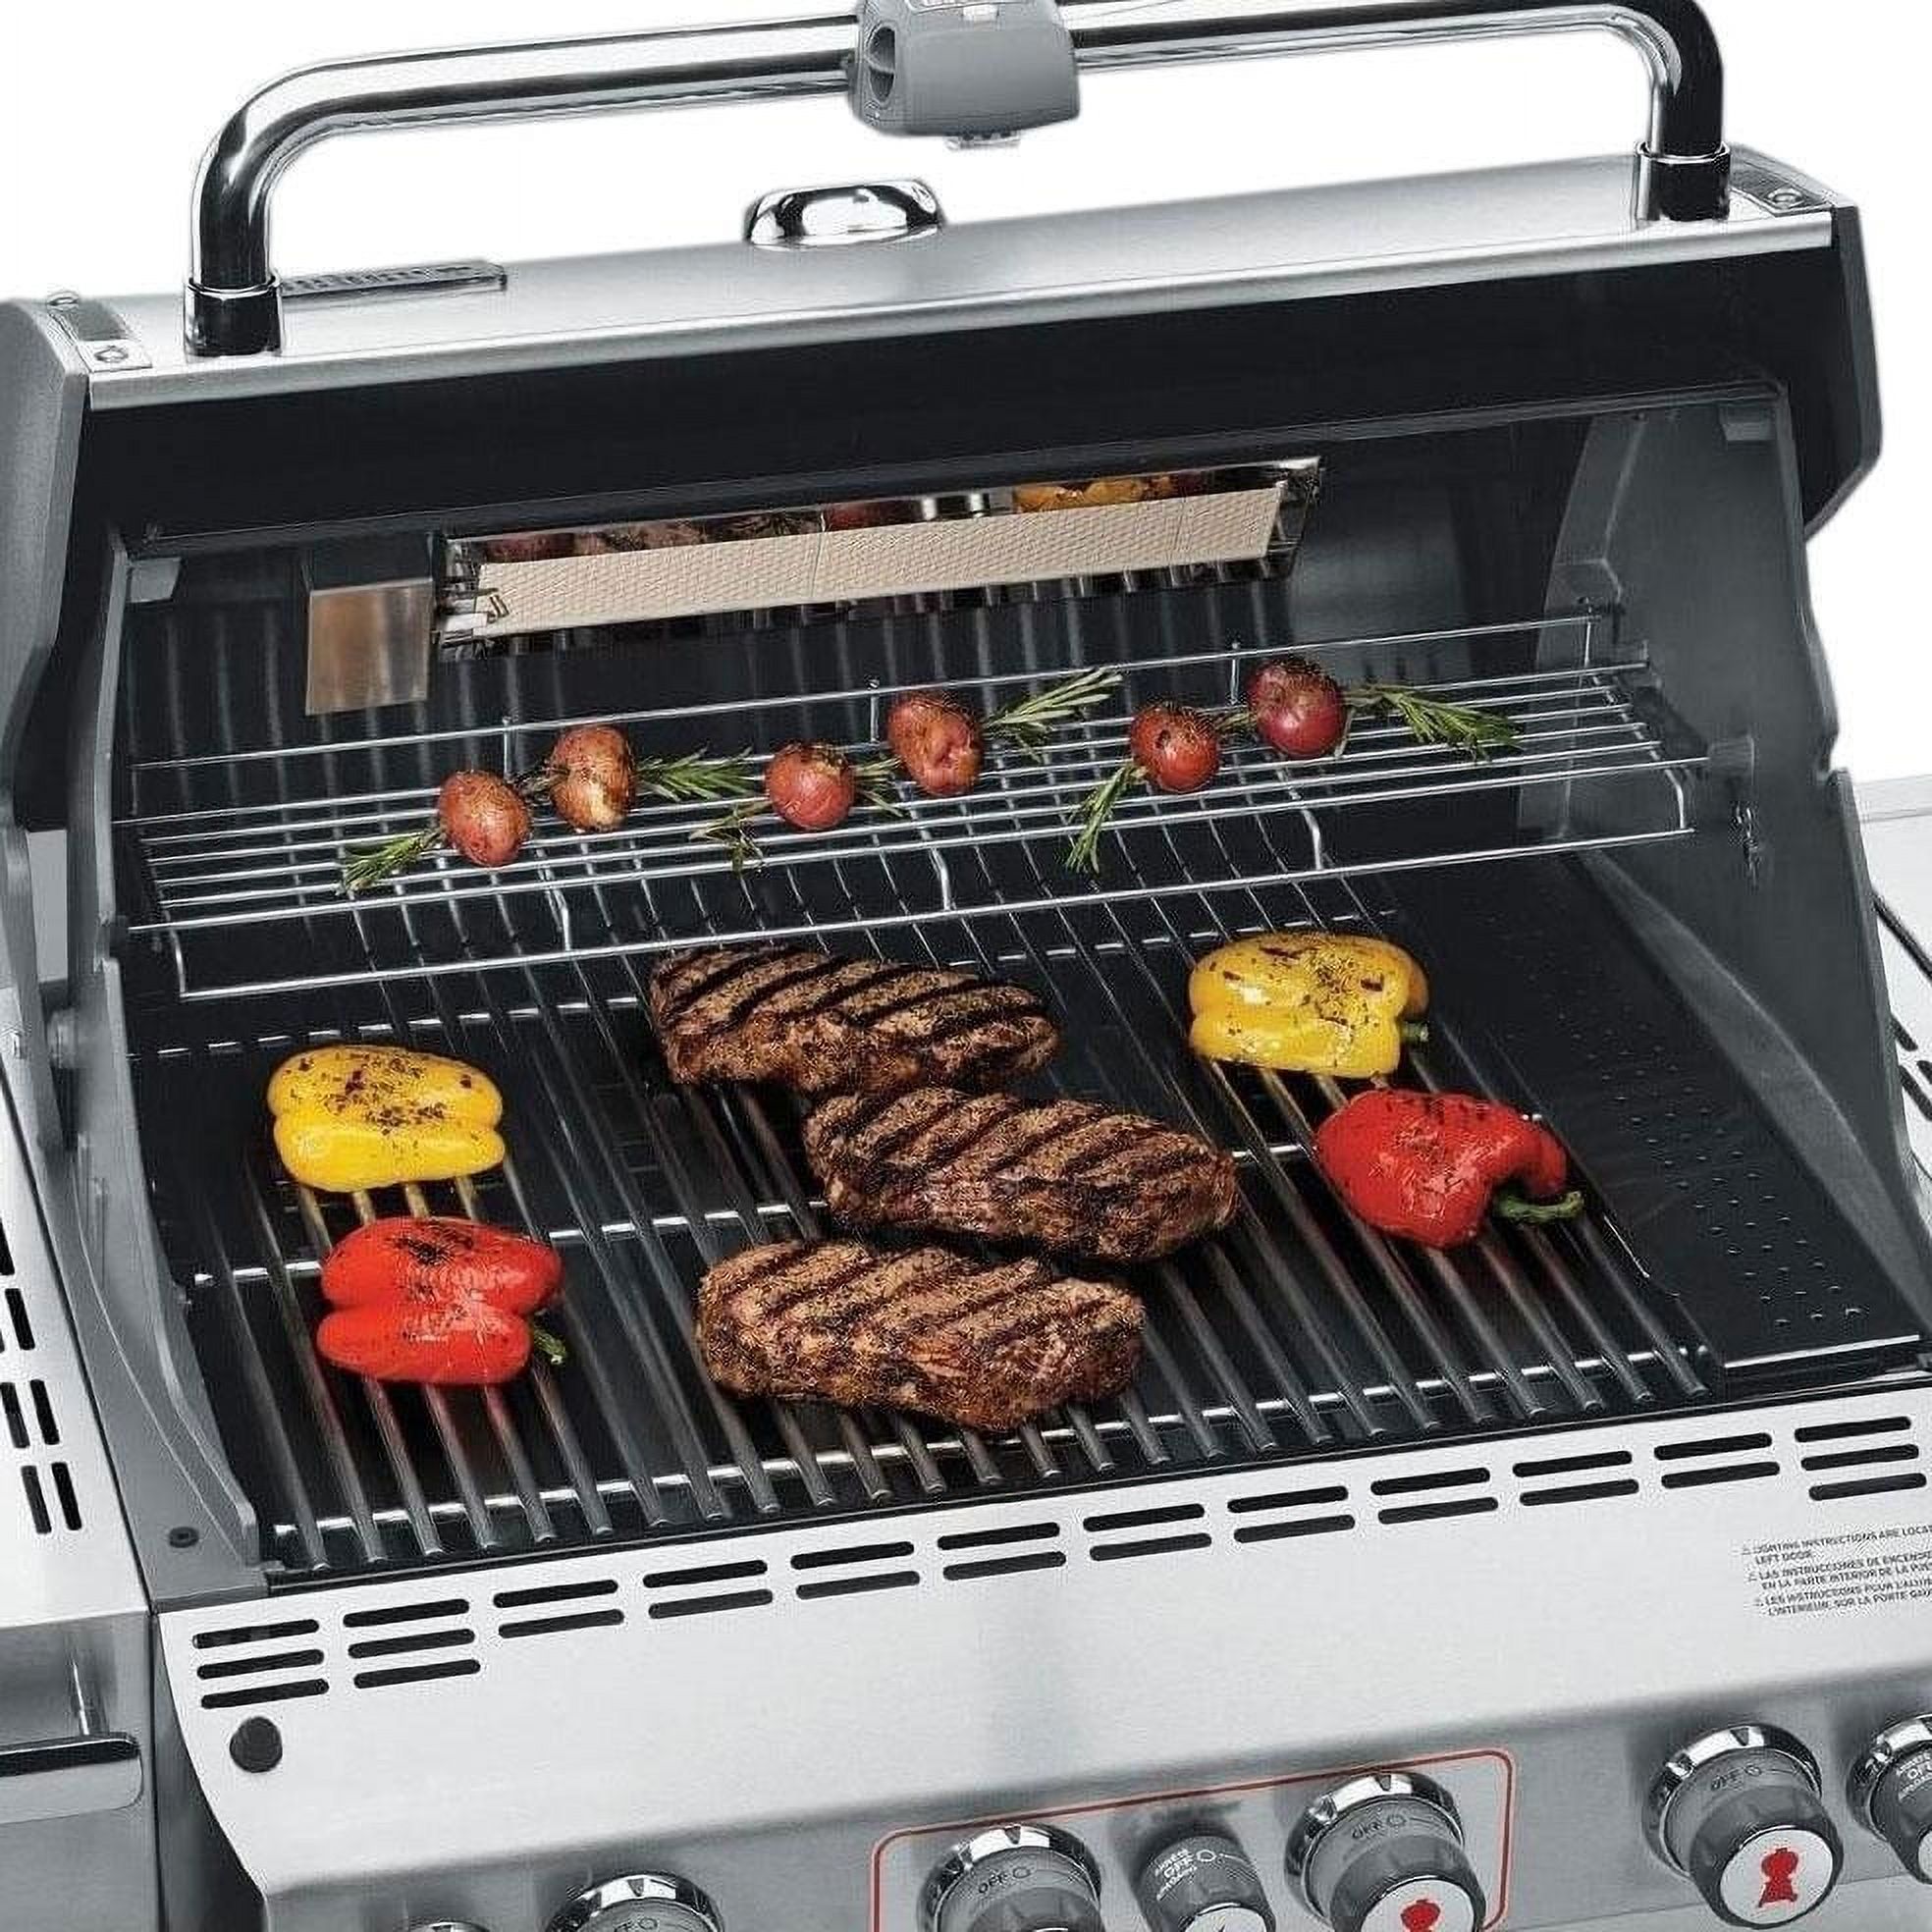 Summit S-470 Propane Stainless Steel - image 2 of 6